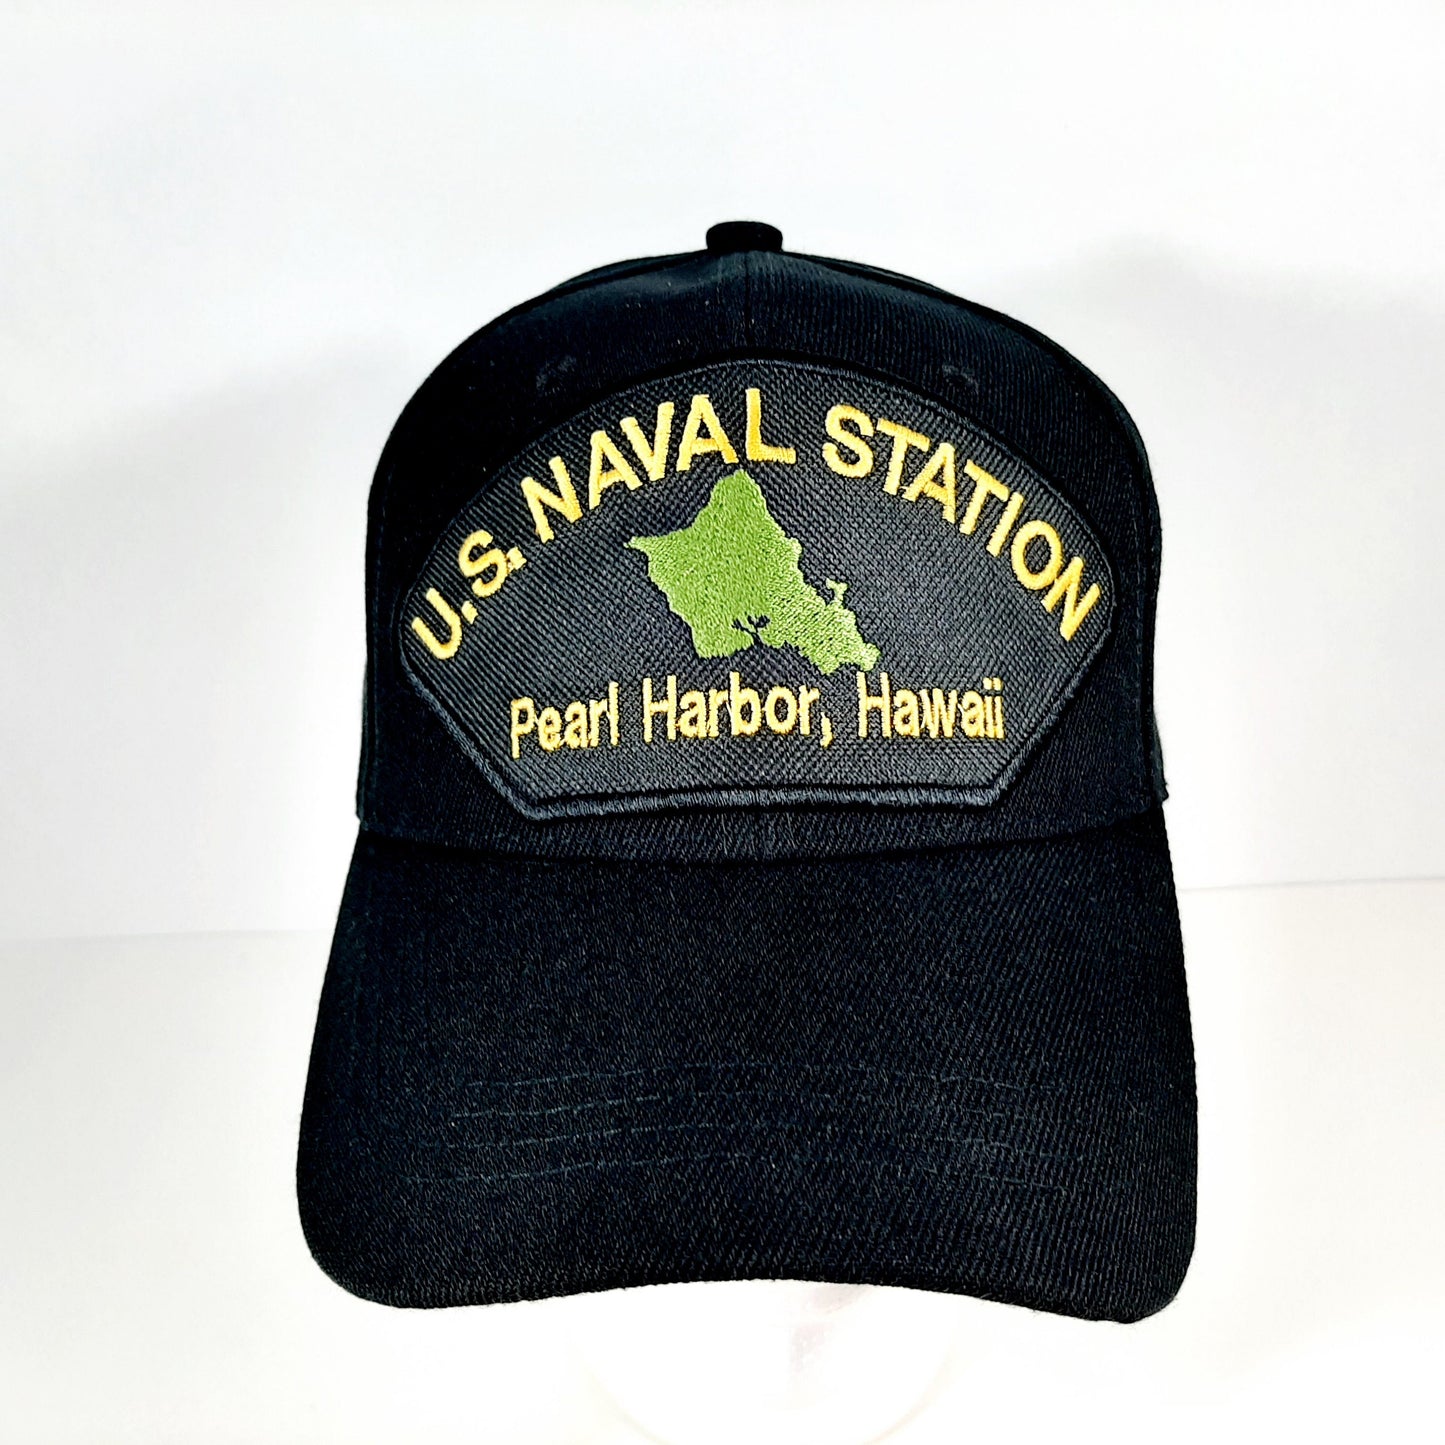 Naval Station Pearl Harbor Hawaii Embroidered Patch Hat Baseball Cap Navy